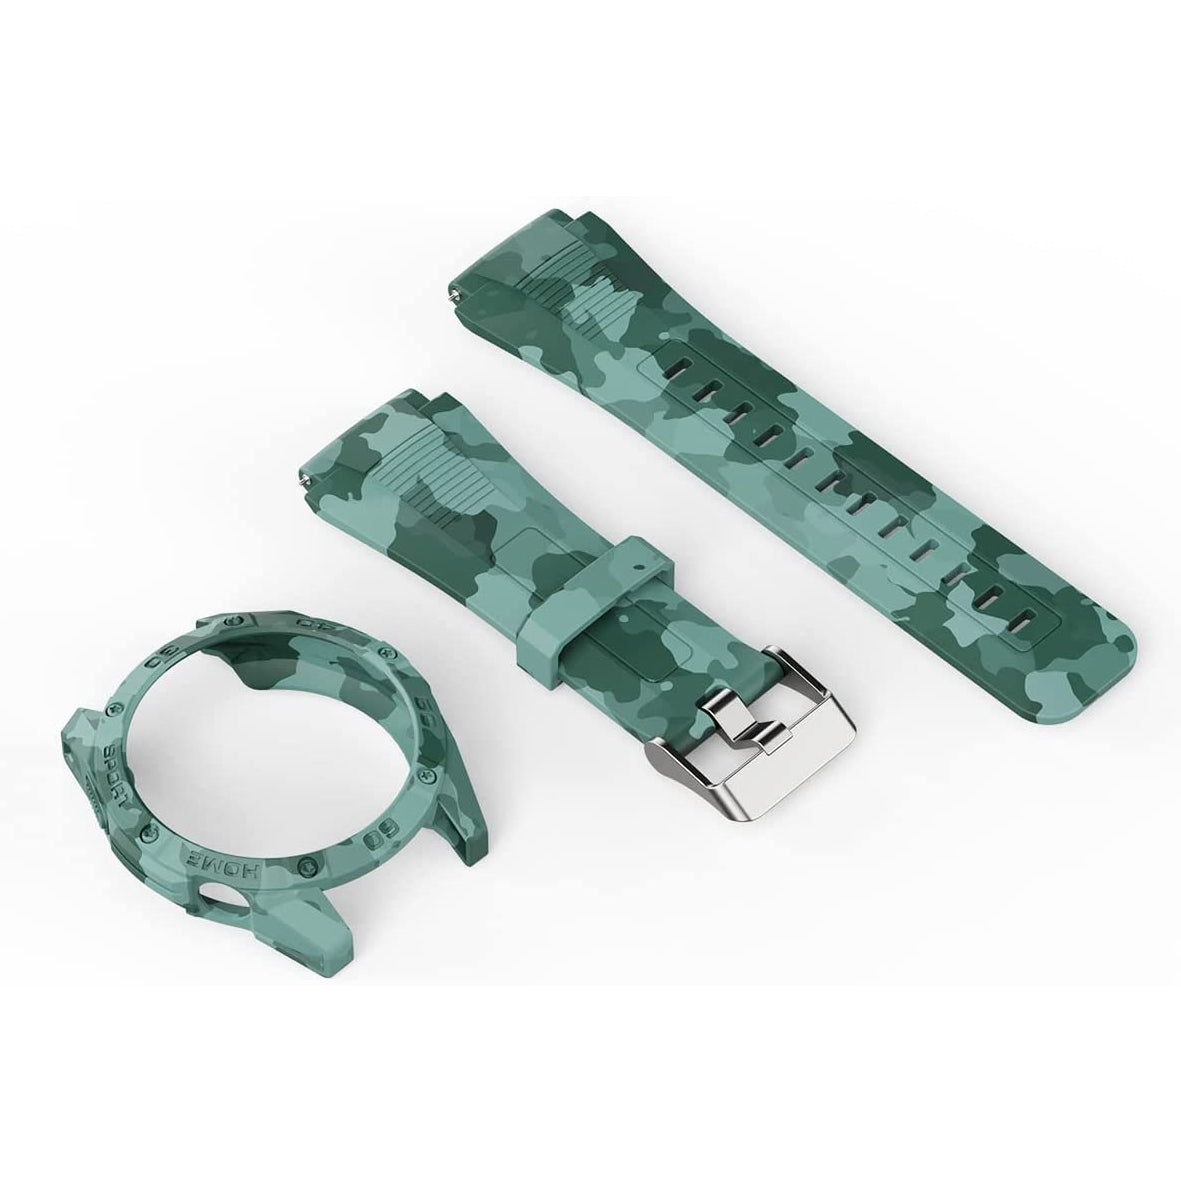 SIKAI for Huawei Watch GT3 46mm - Protective Case and Replacement Band Set in Camouflage Desig SIKAI CASE